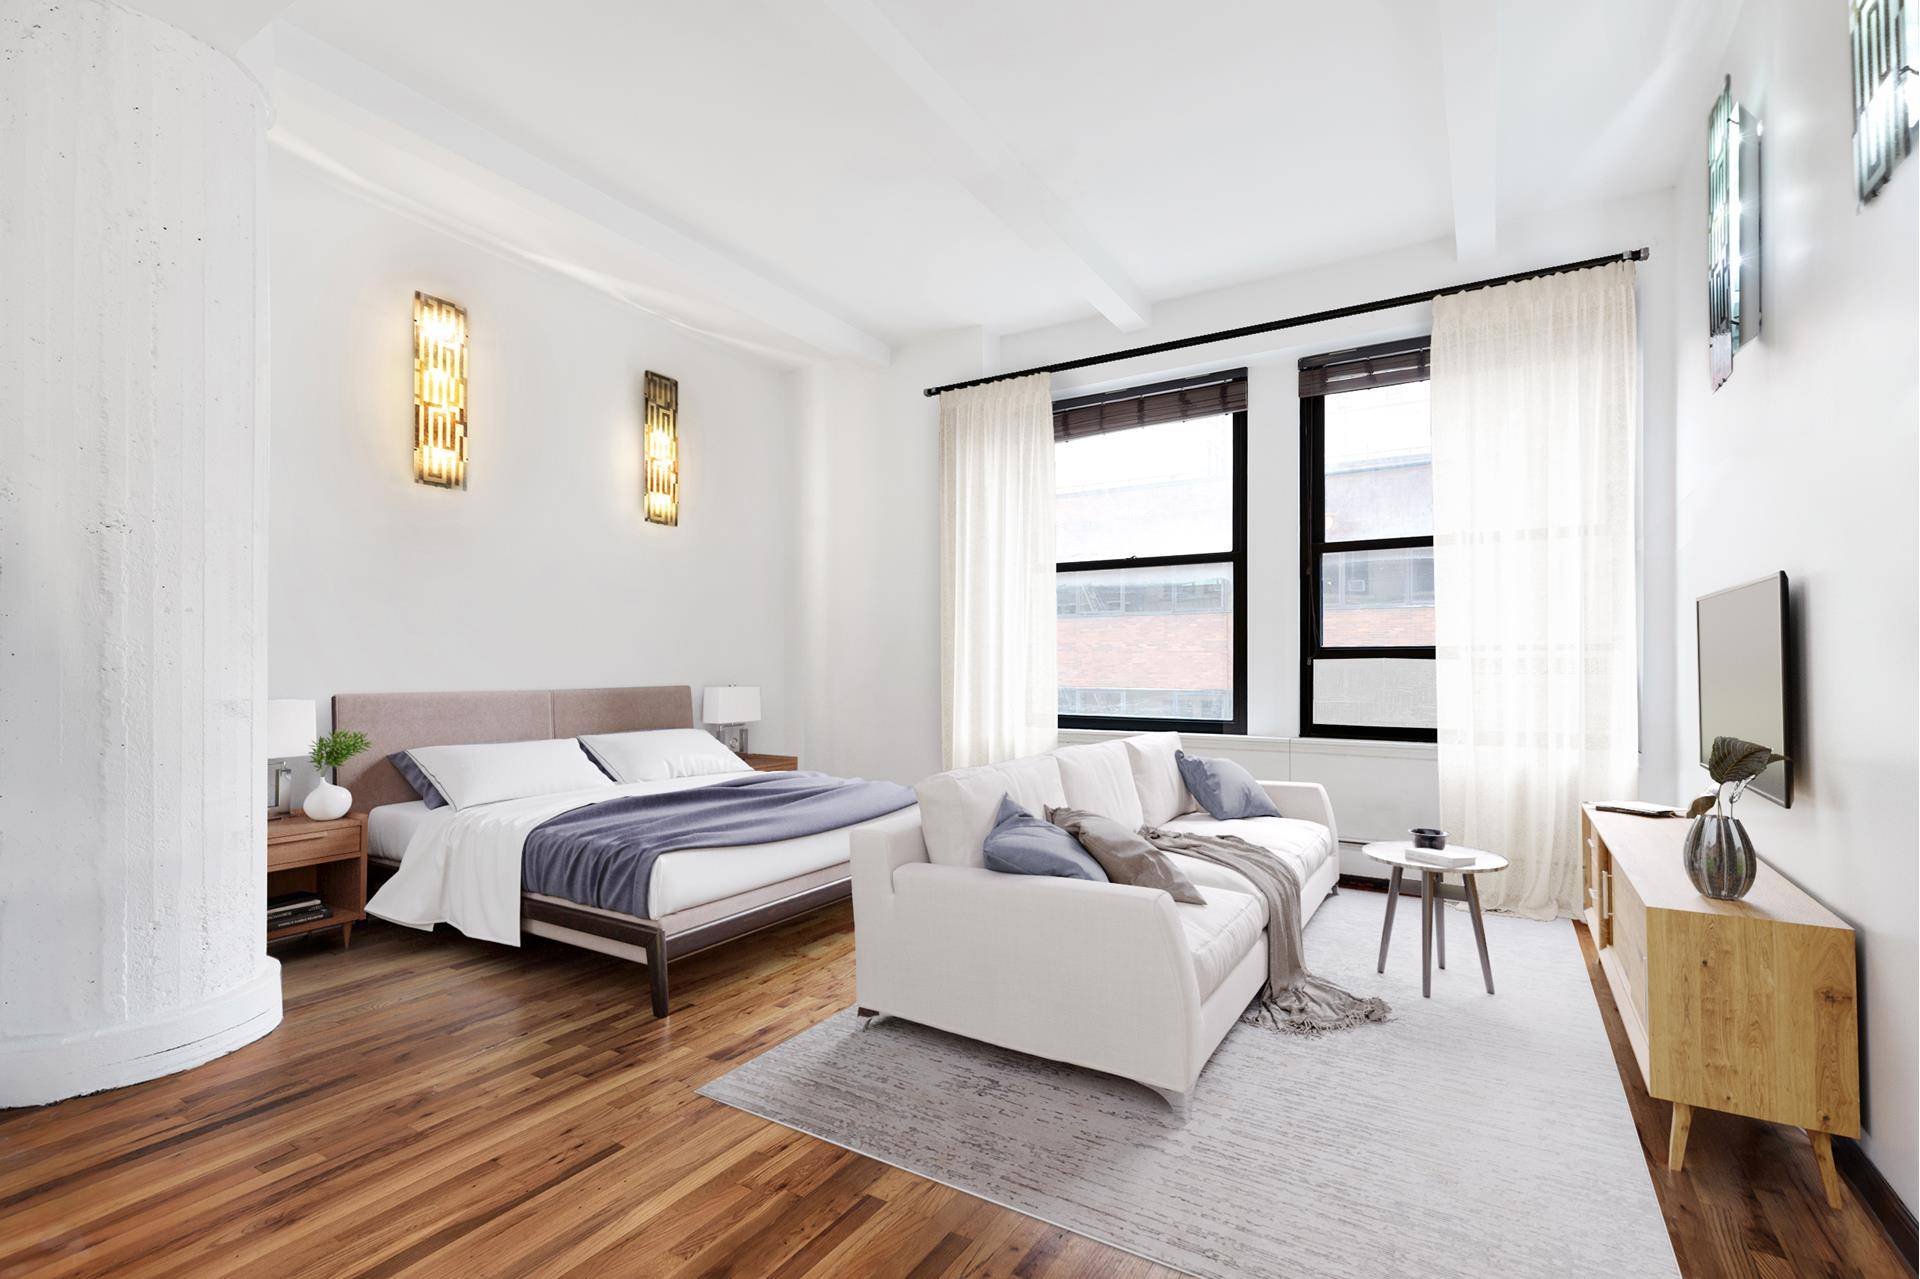 Large Alcove Studio the Iconic 250 Mercer is sure to impress located in one of the most coveted buildings in Greenwich Village NOHO.